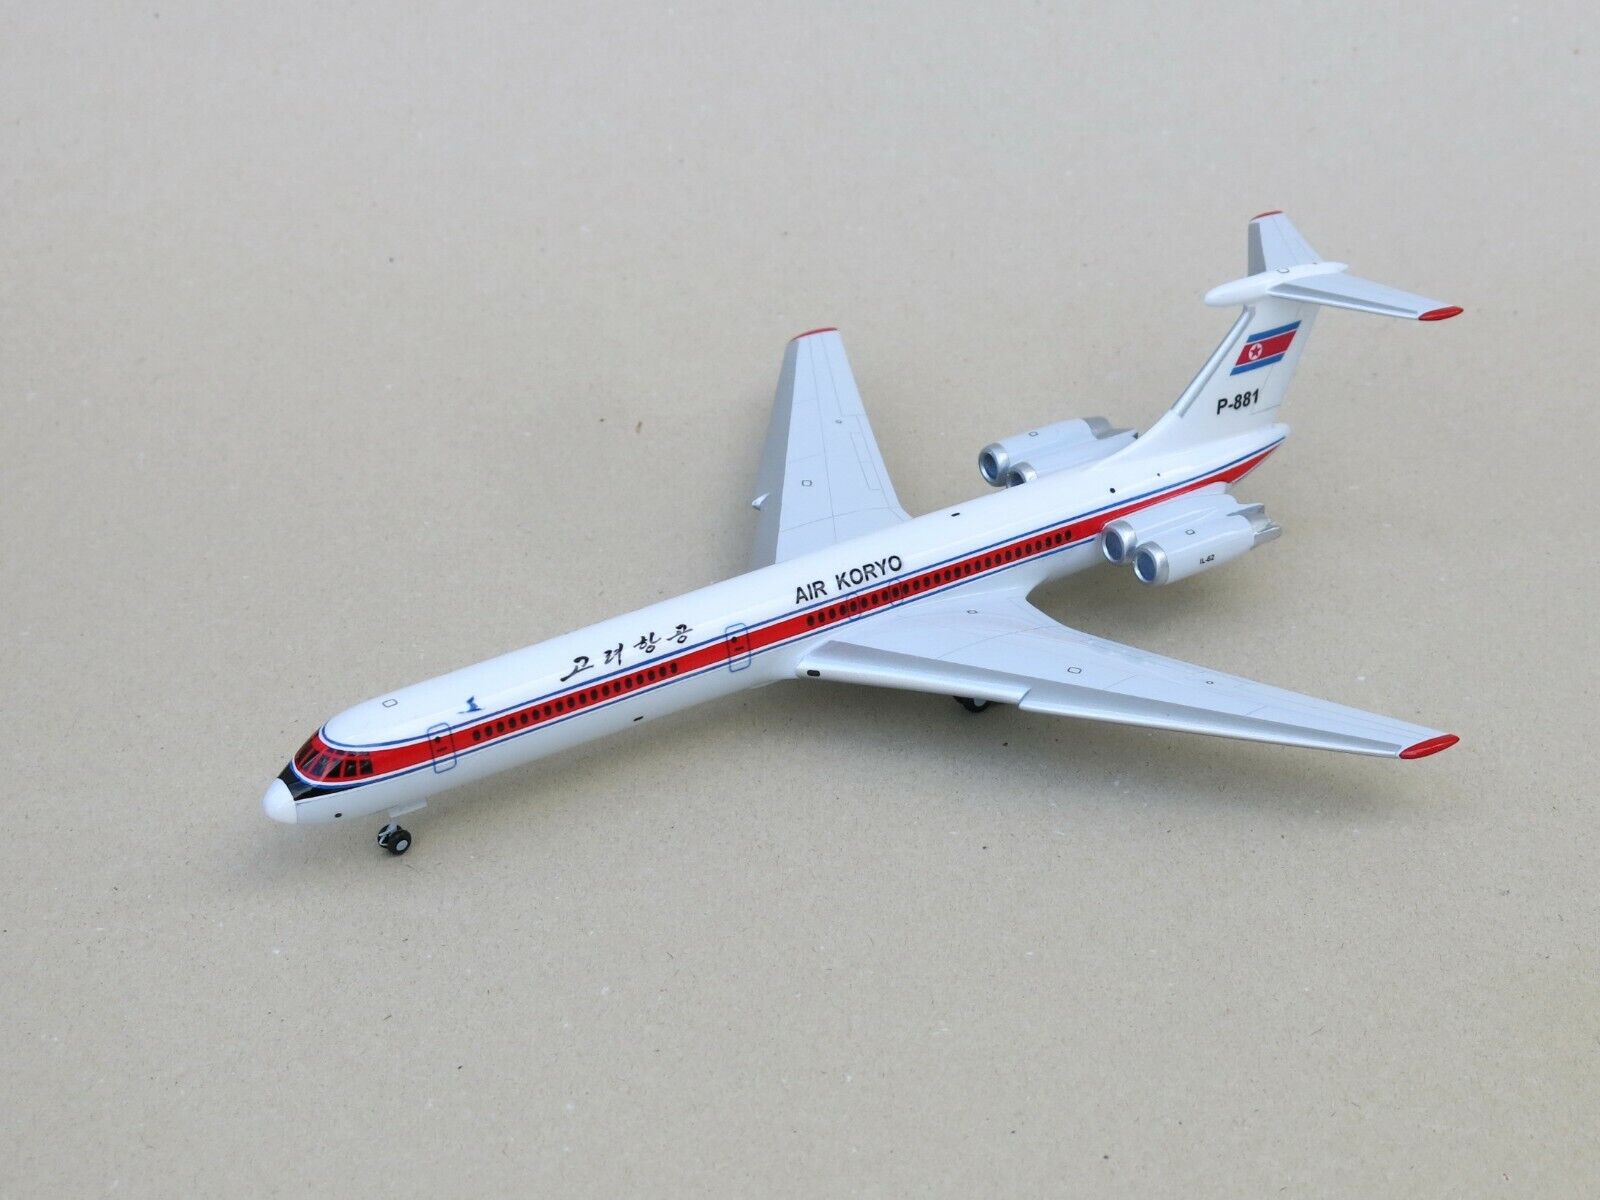 IL-62M Scale 1:200  Air Koryo Airlines Exclusive Handmade on Landing Gear